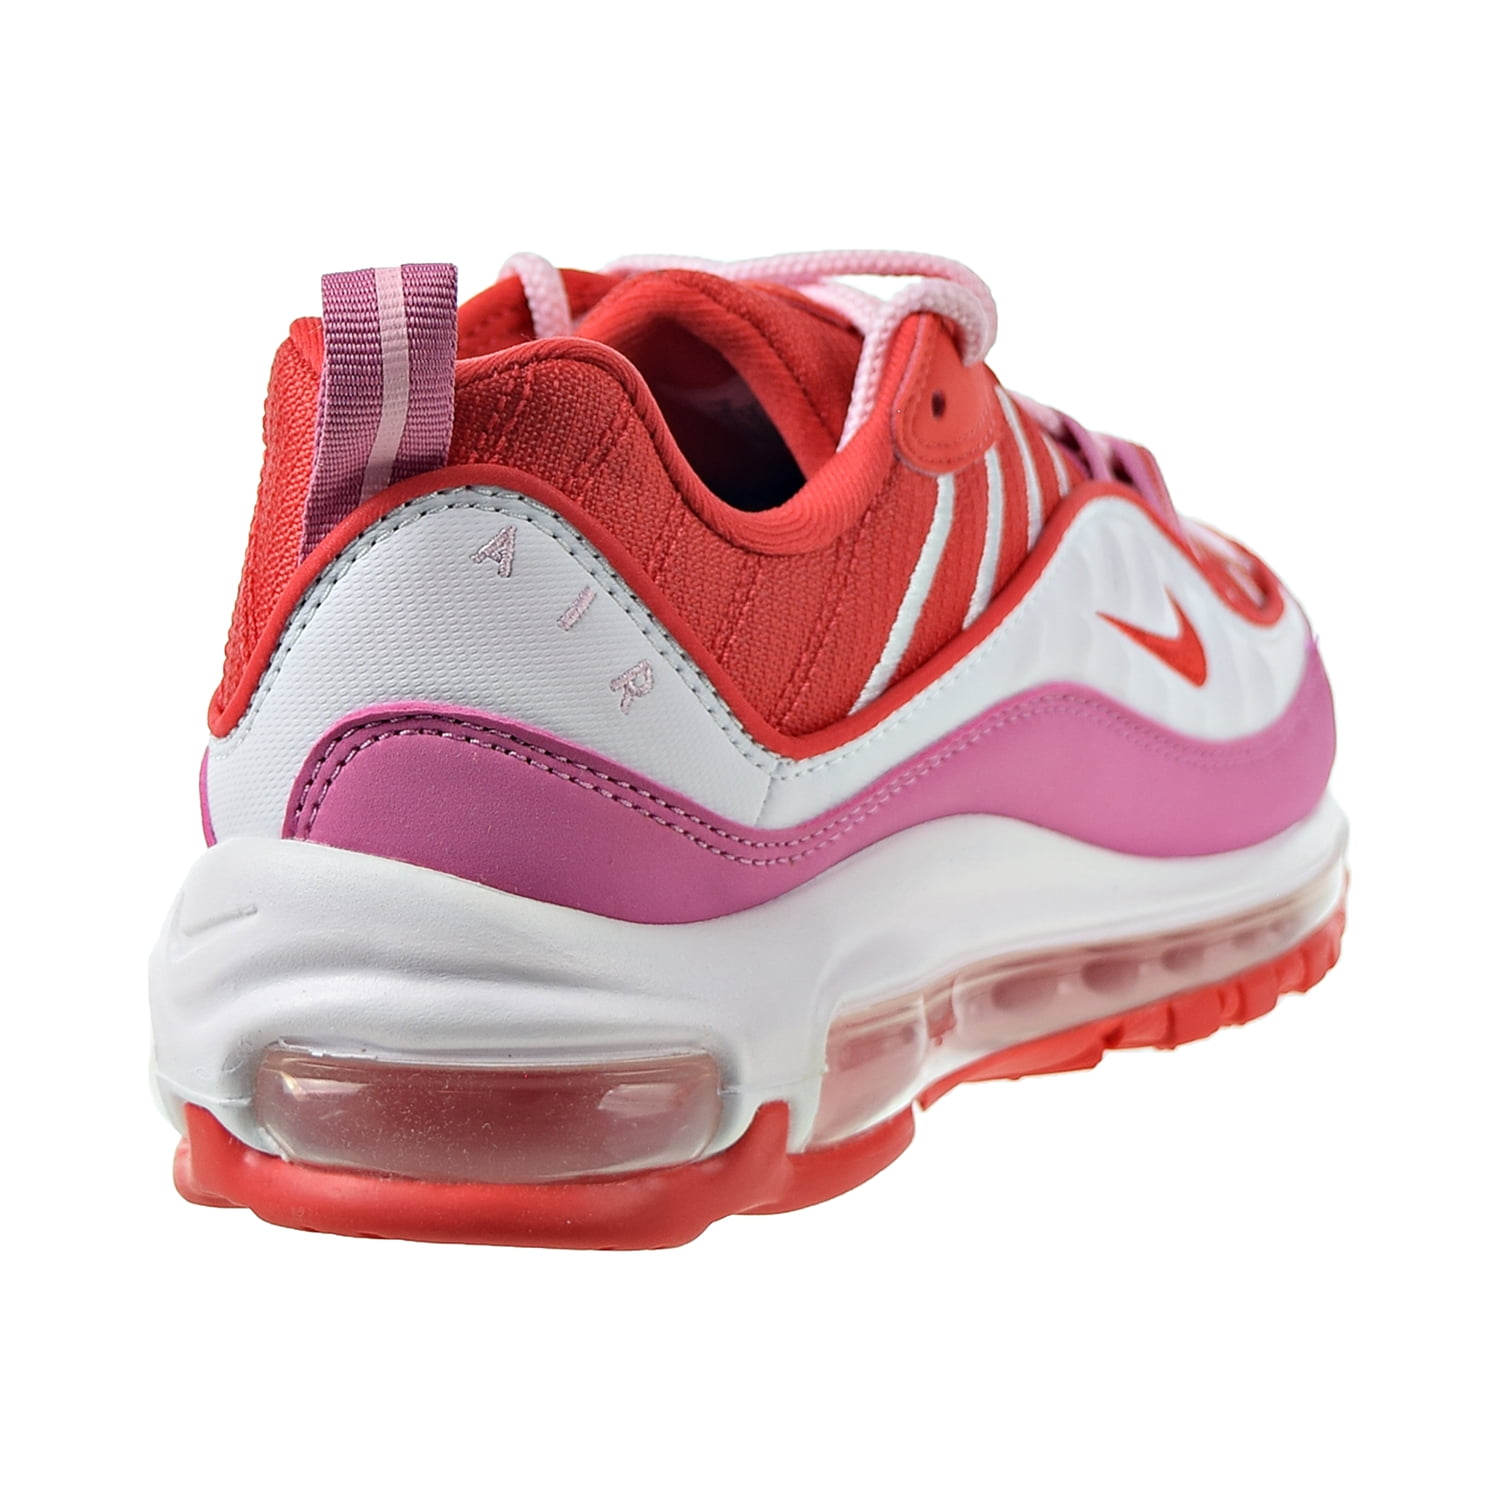 air max 98 valentine's dayBest Places 